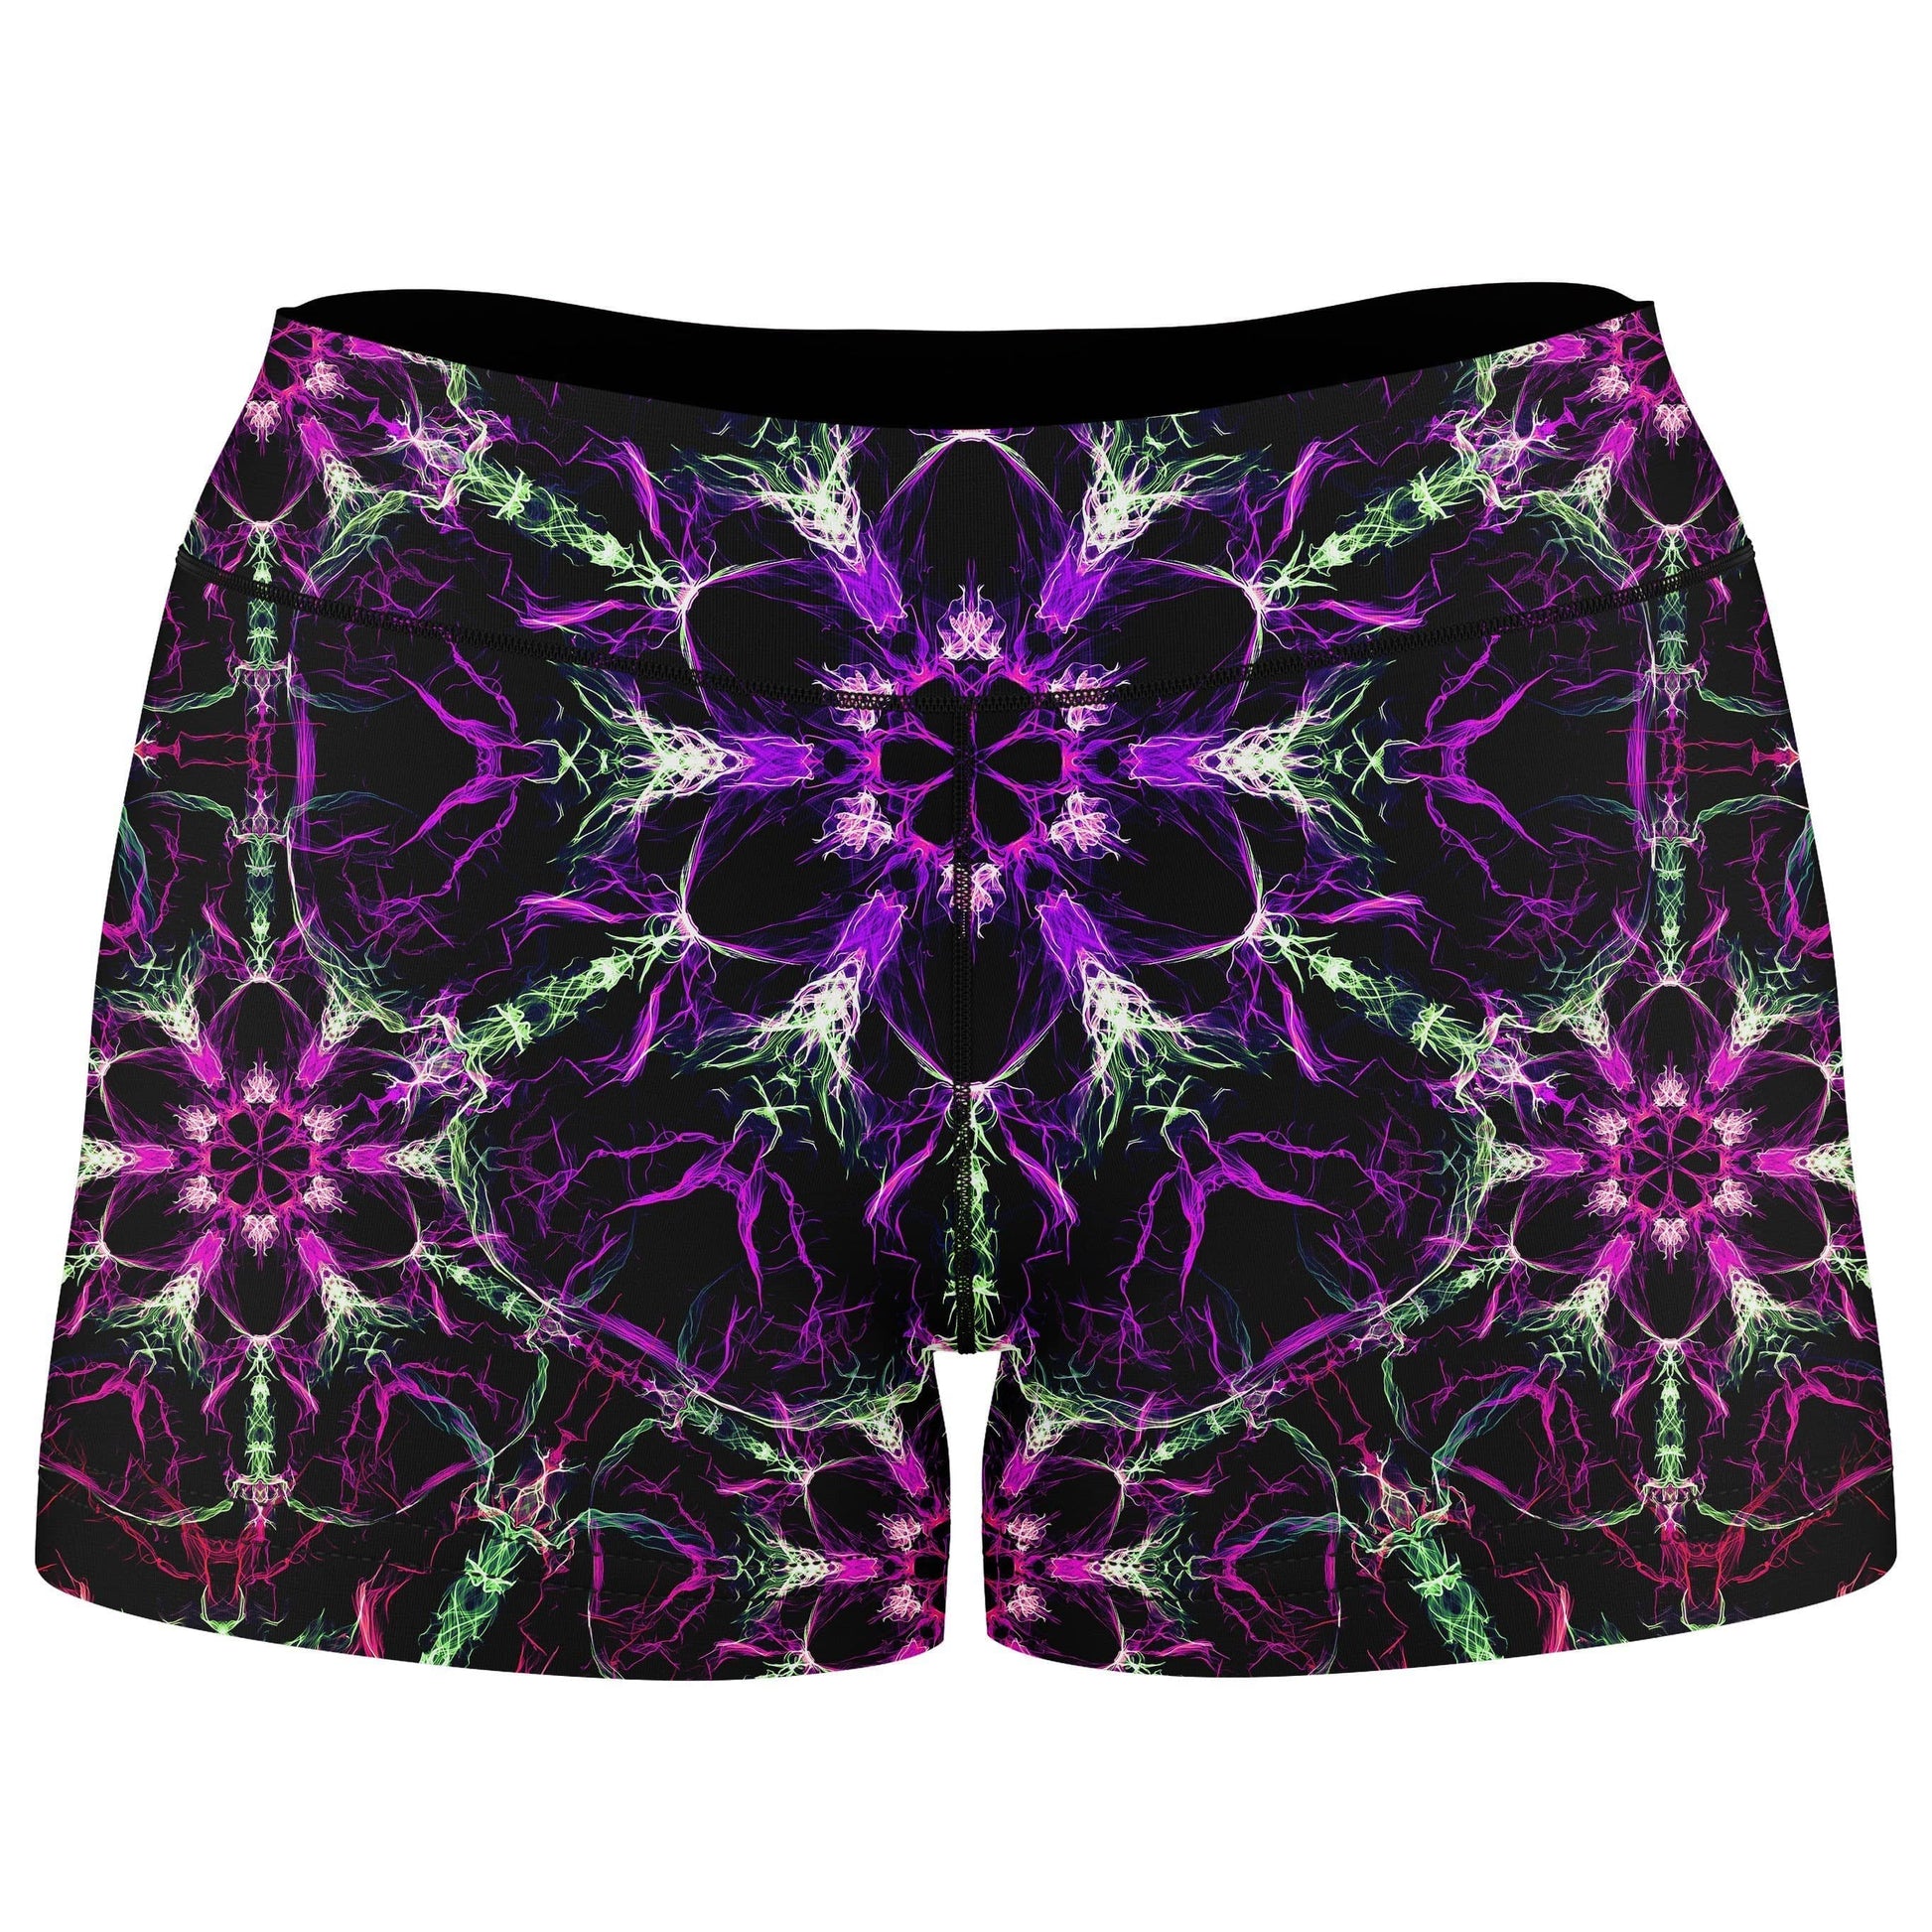 Psyched High-Waisted Women's Shorts, Yantrart Design, | iEDM